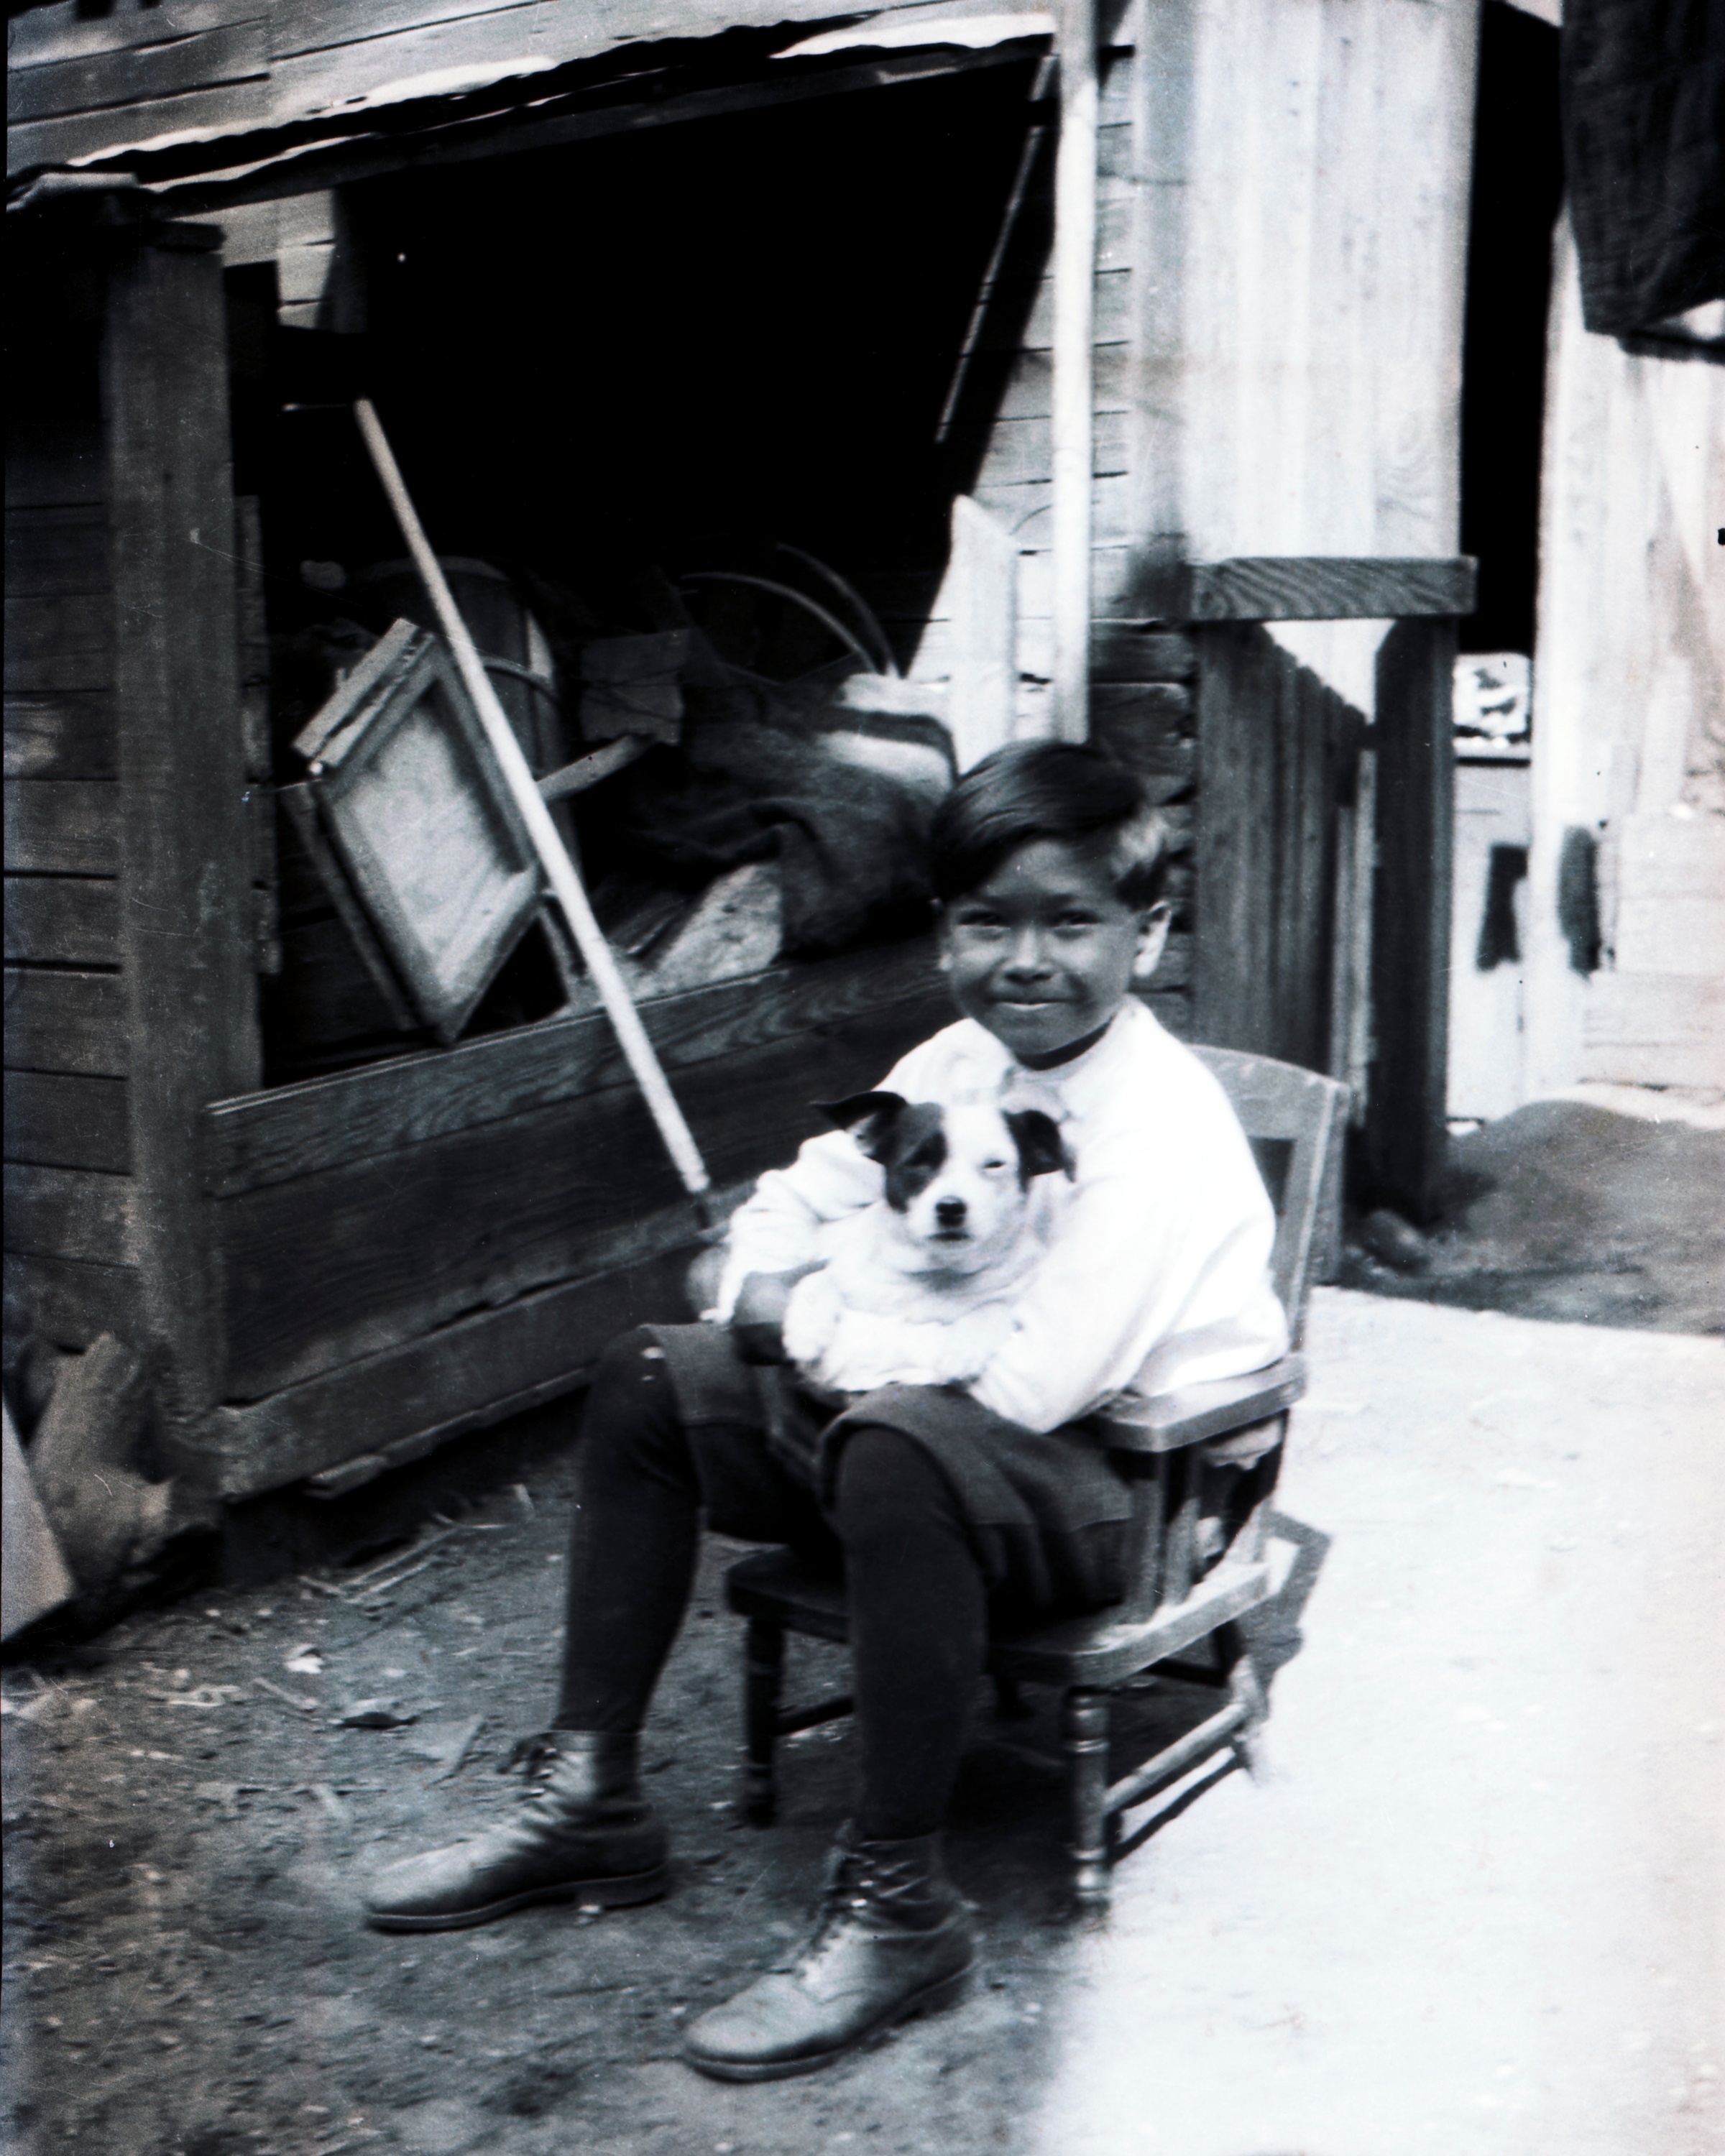 Me and Tricky, sitting in "the chair" that Charley liked to tell about, in the walled courtyard behind our laundry.